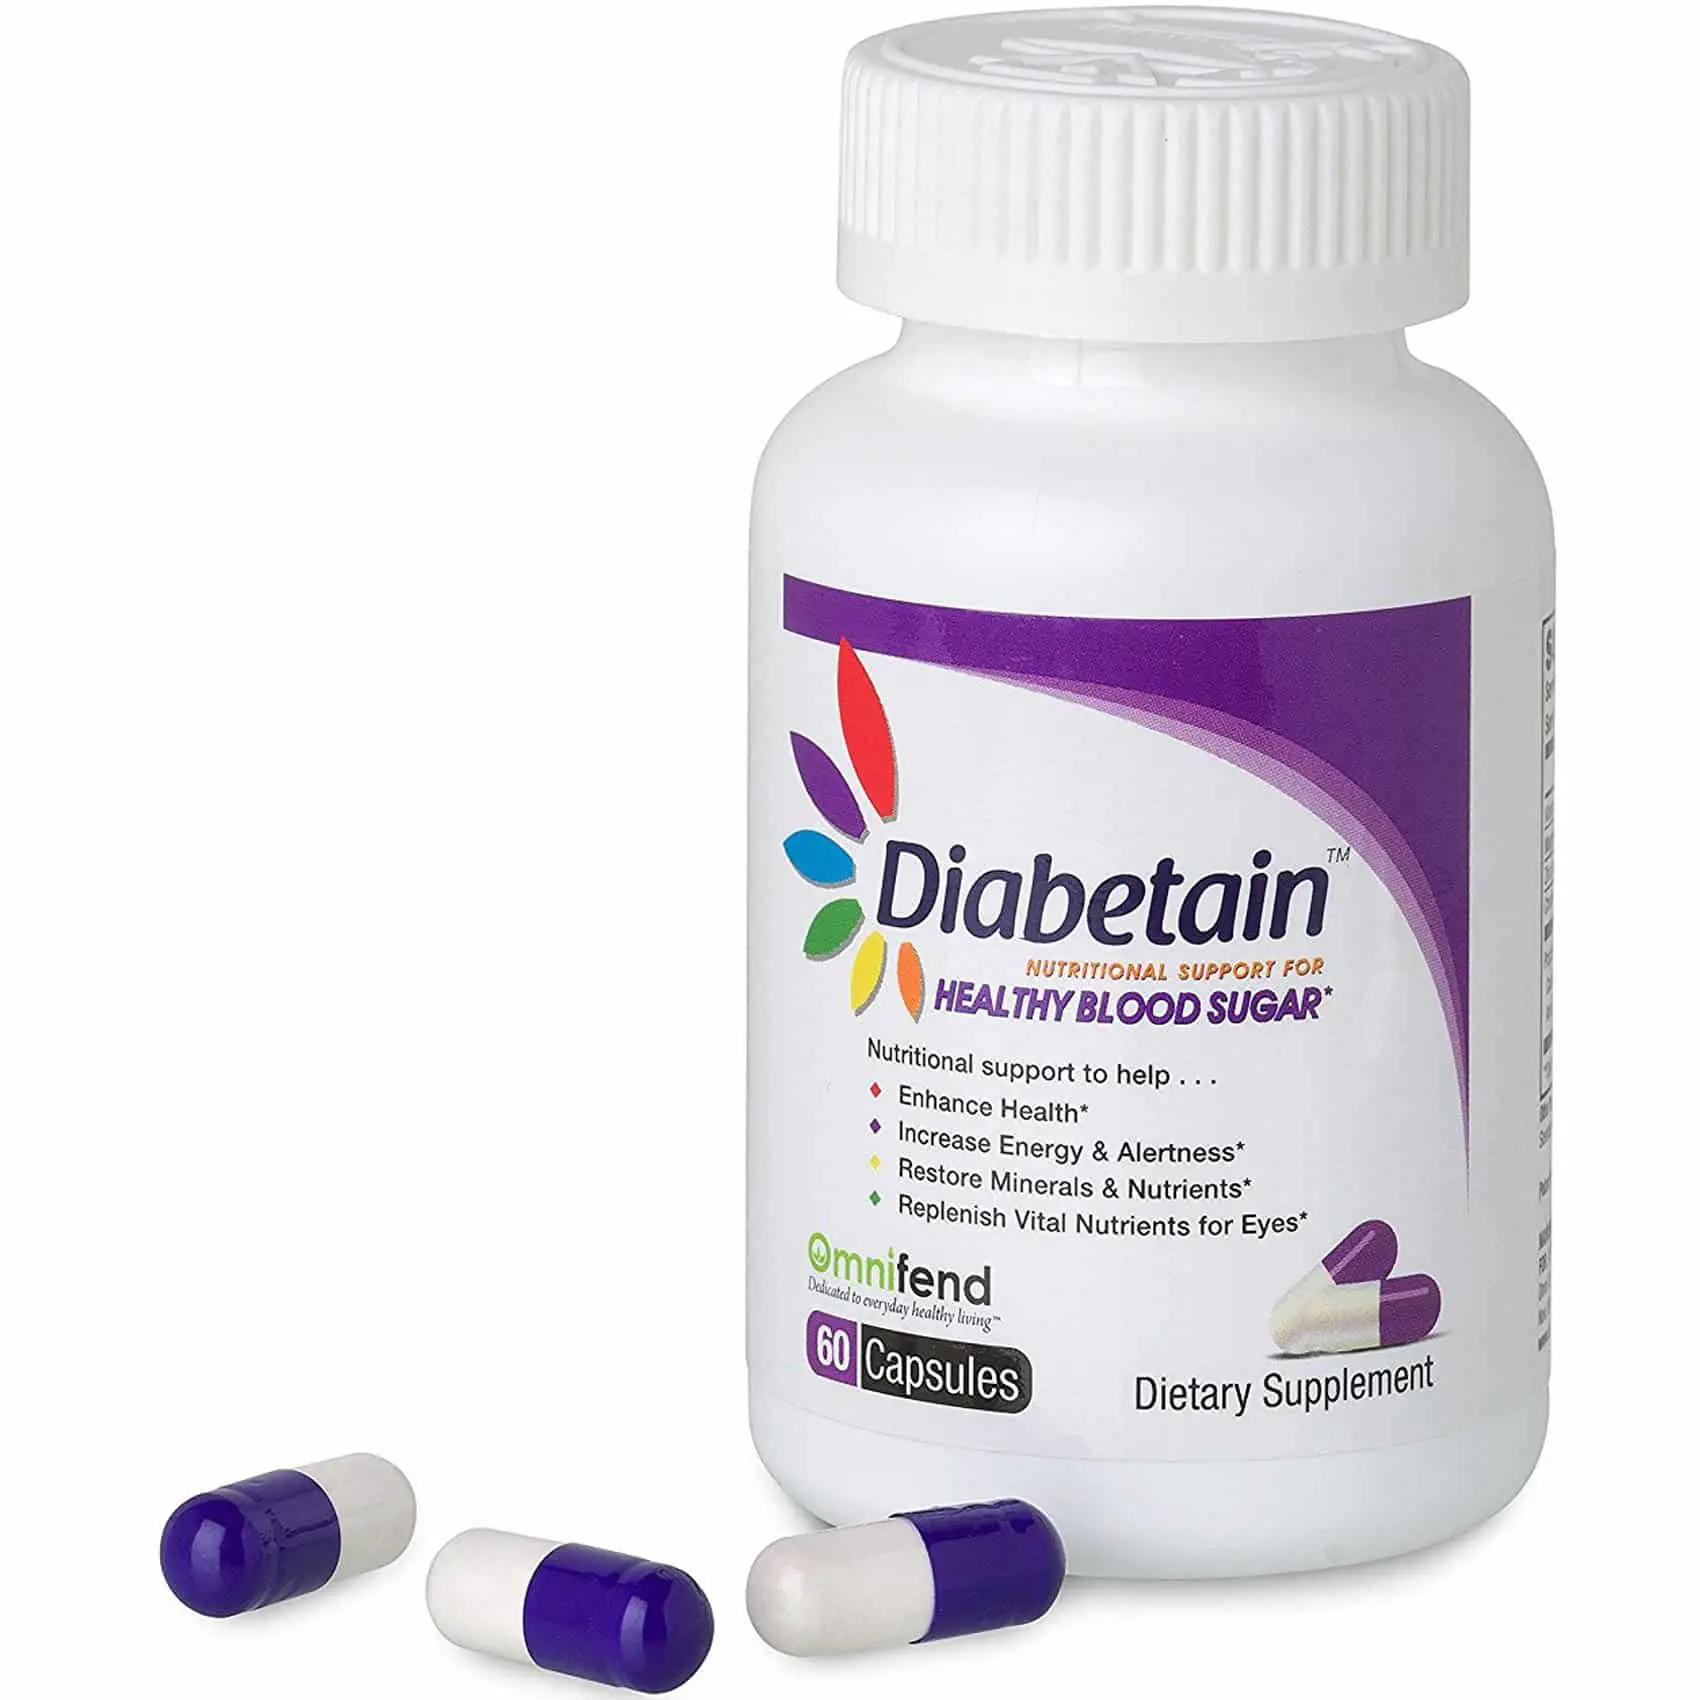 Diabetain Type 2 Diabetes Supplement by Omnifend